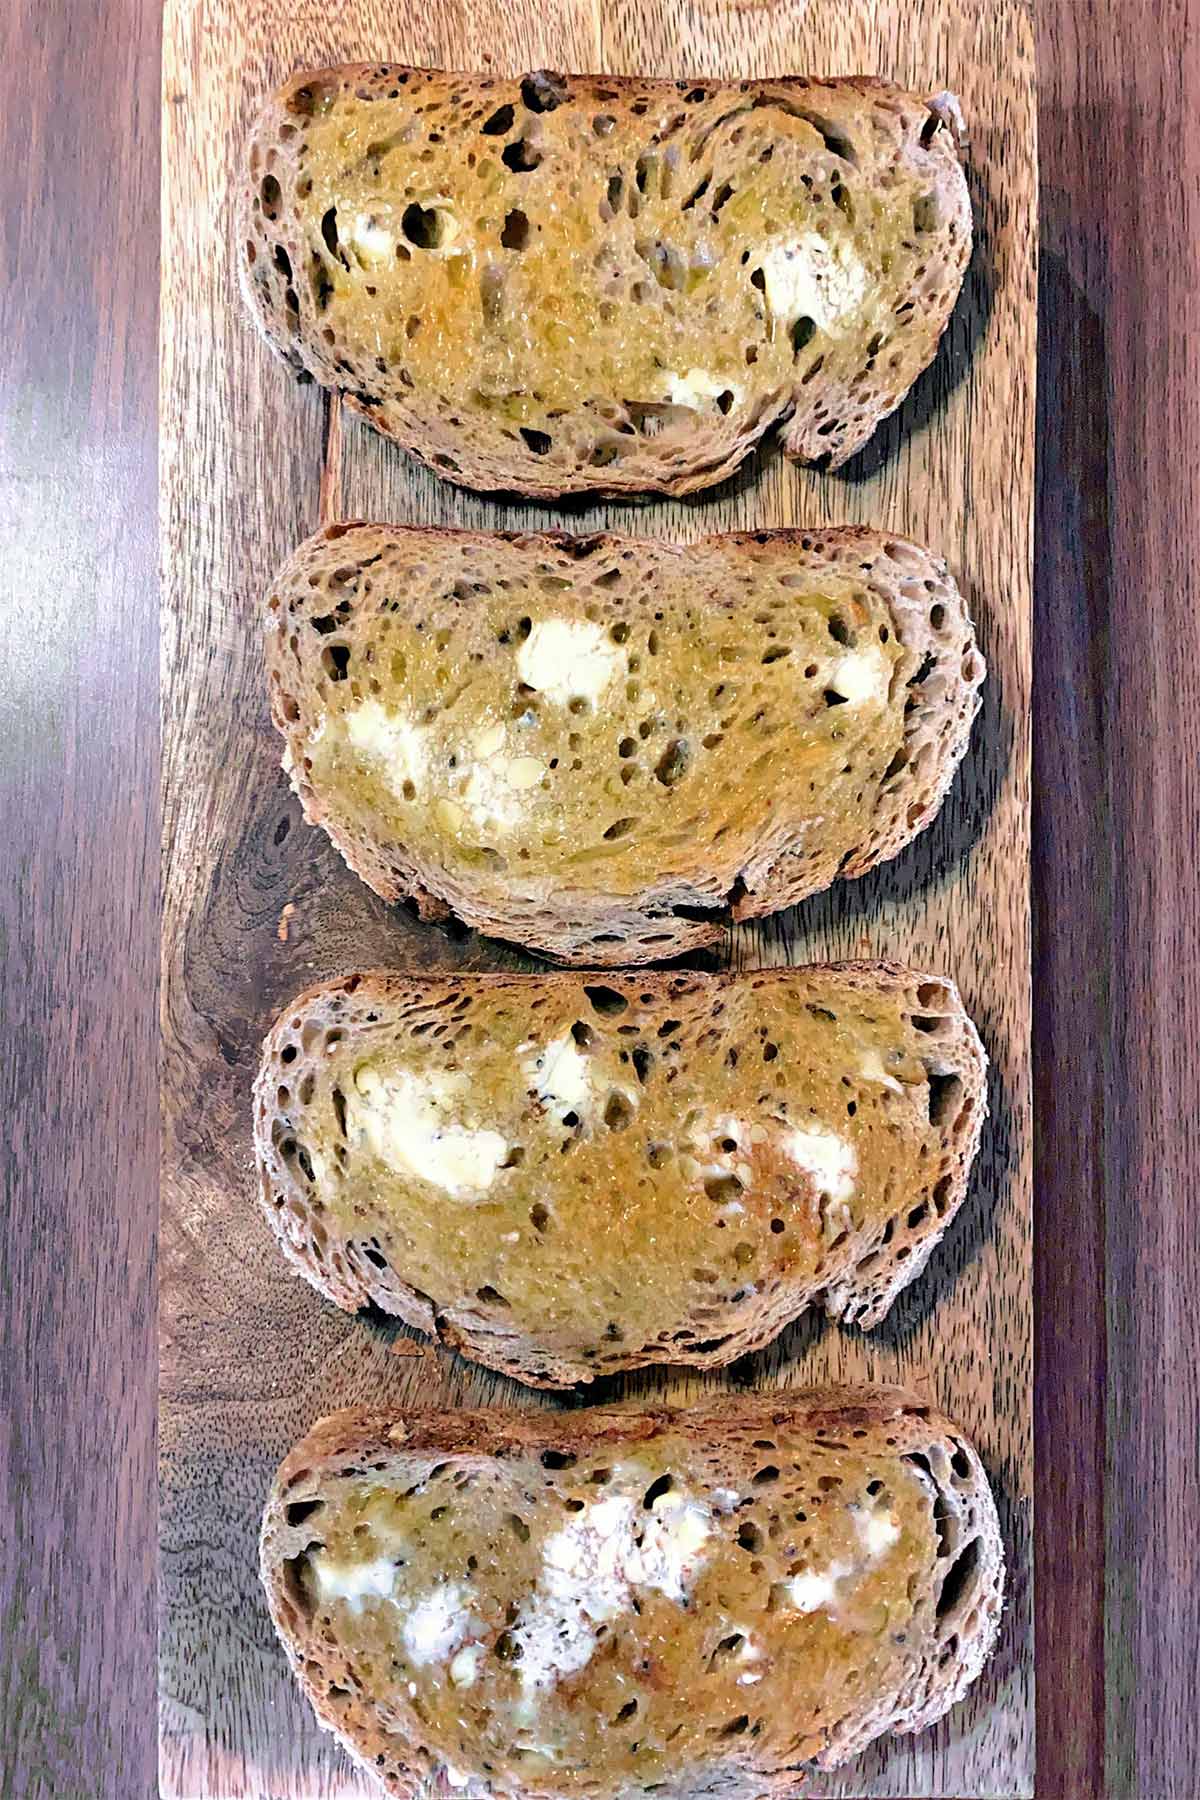 Four slices of toasted and buttered bread.